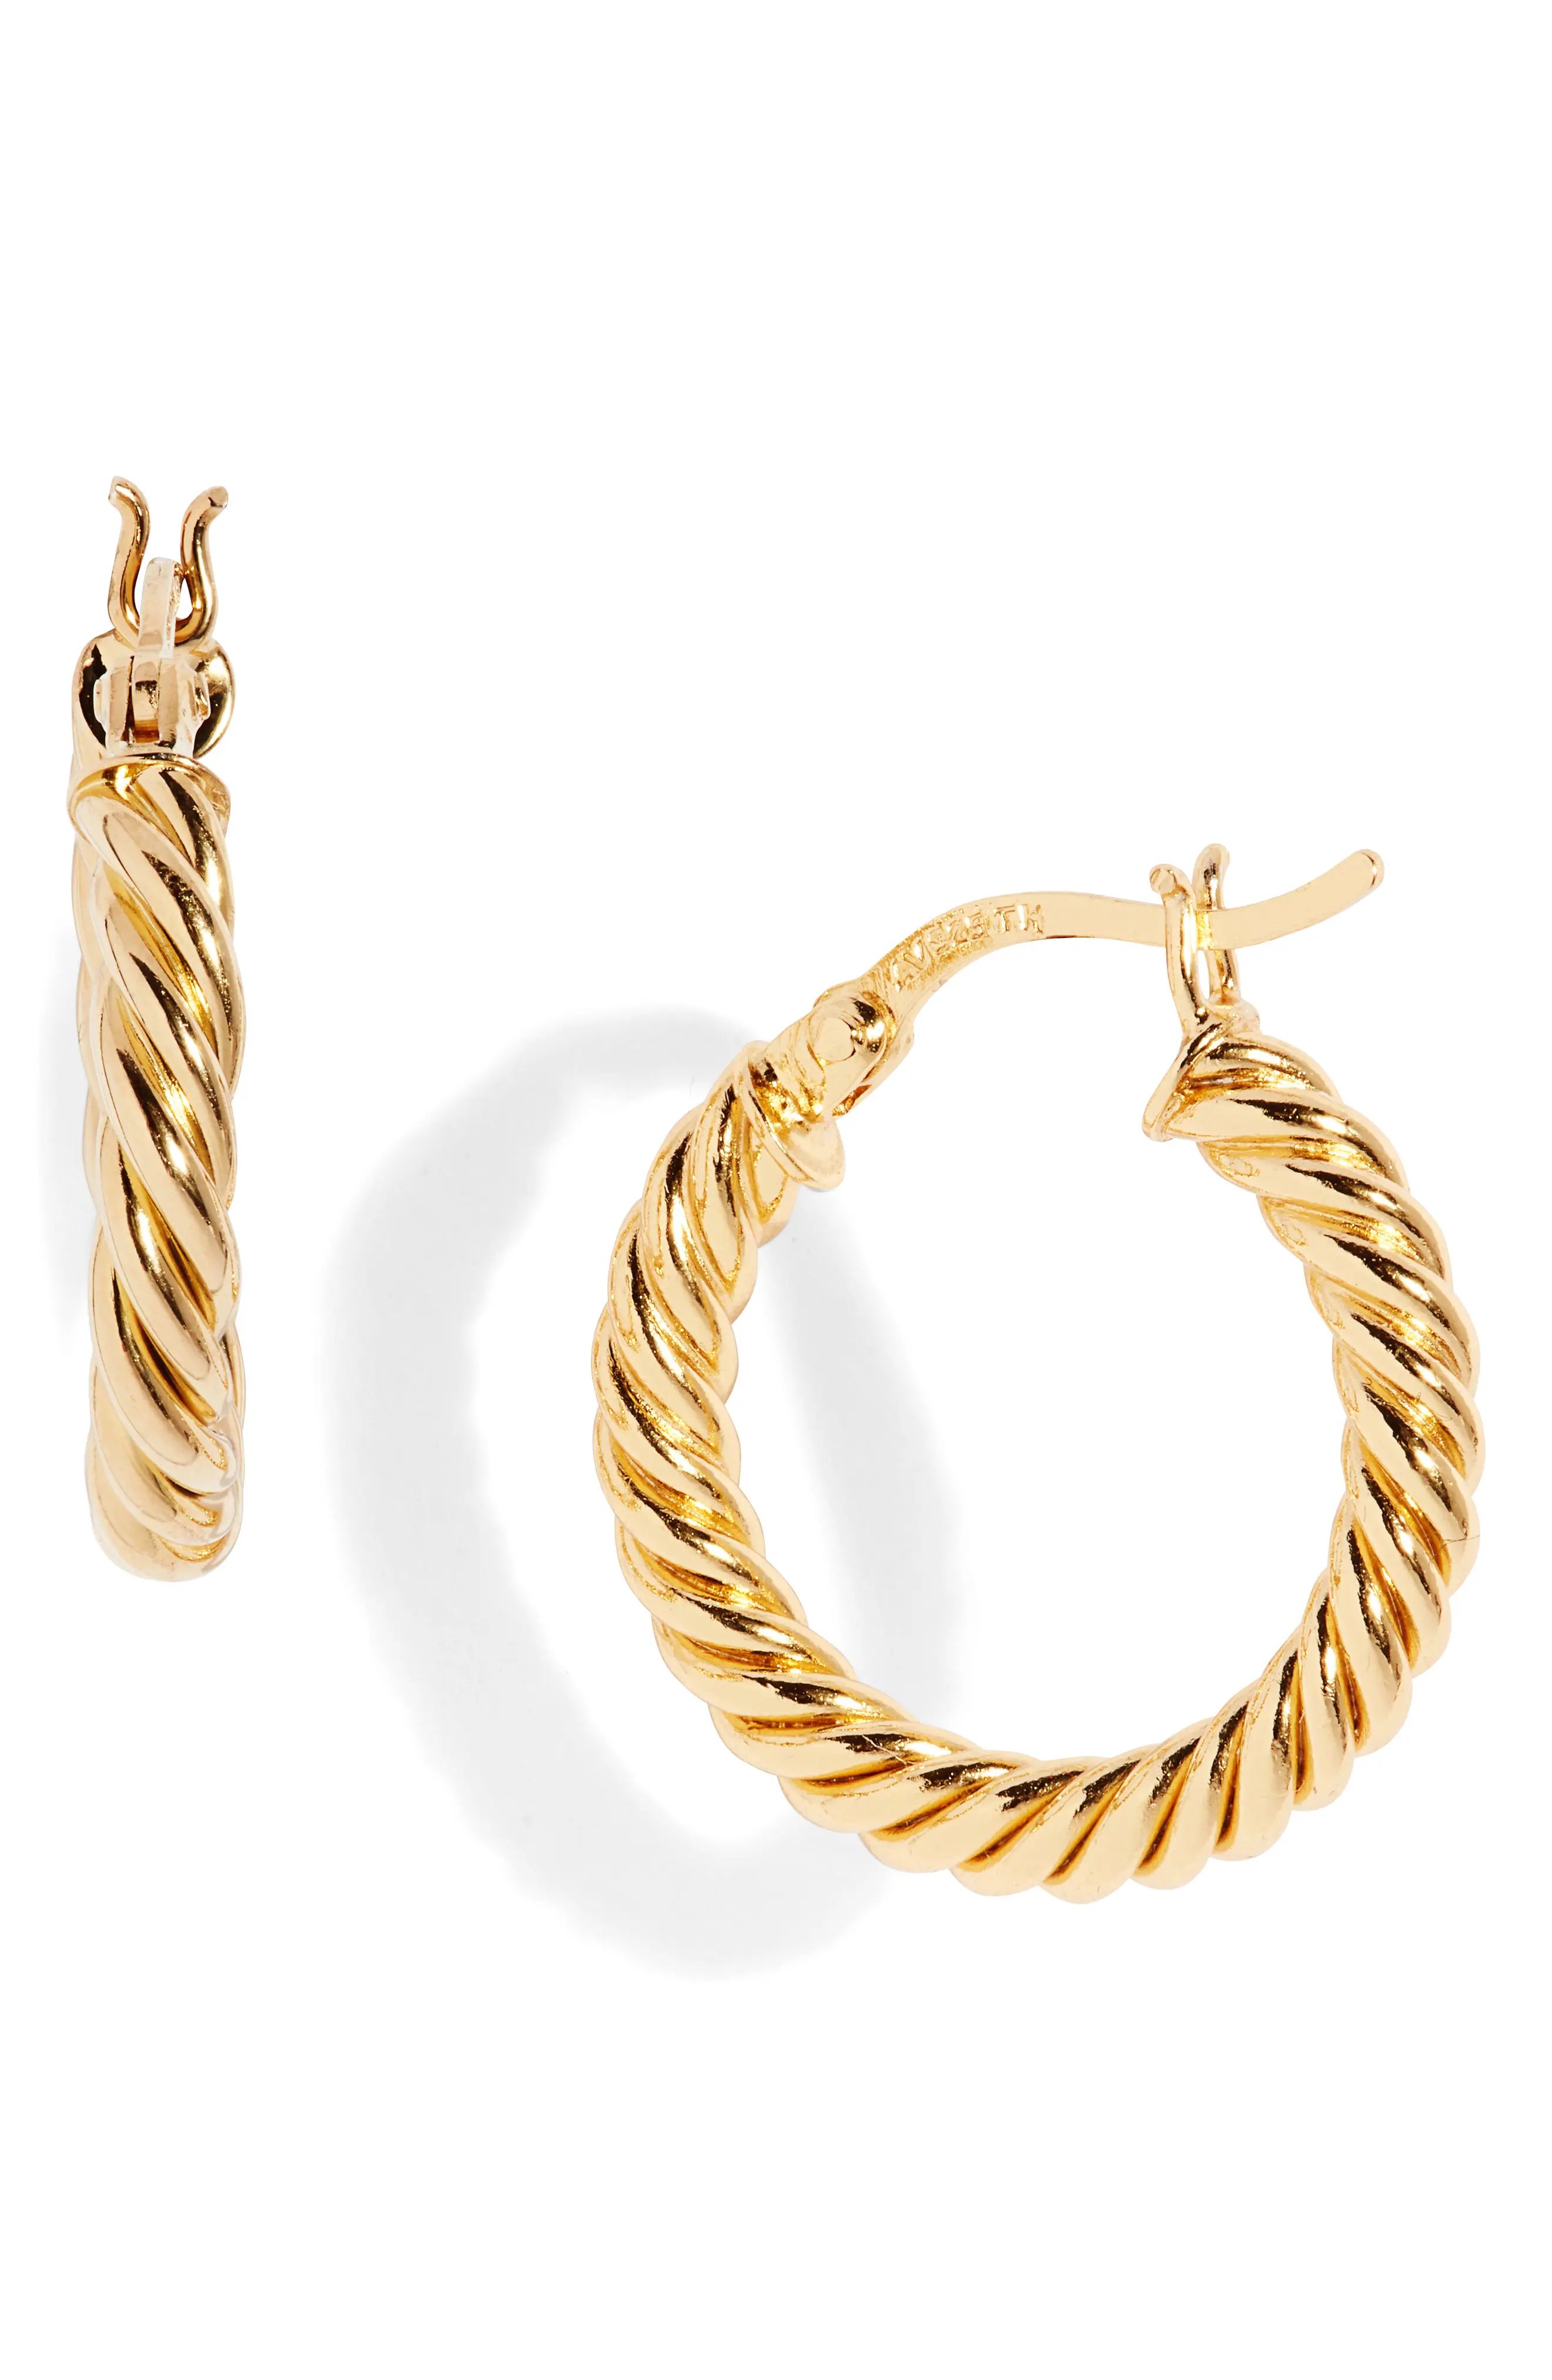 Argento Vivo Sterling Silver Twisted Hoop Earrings in Gold at Nordstrom | Nordstrom